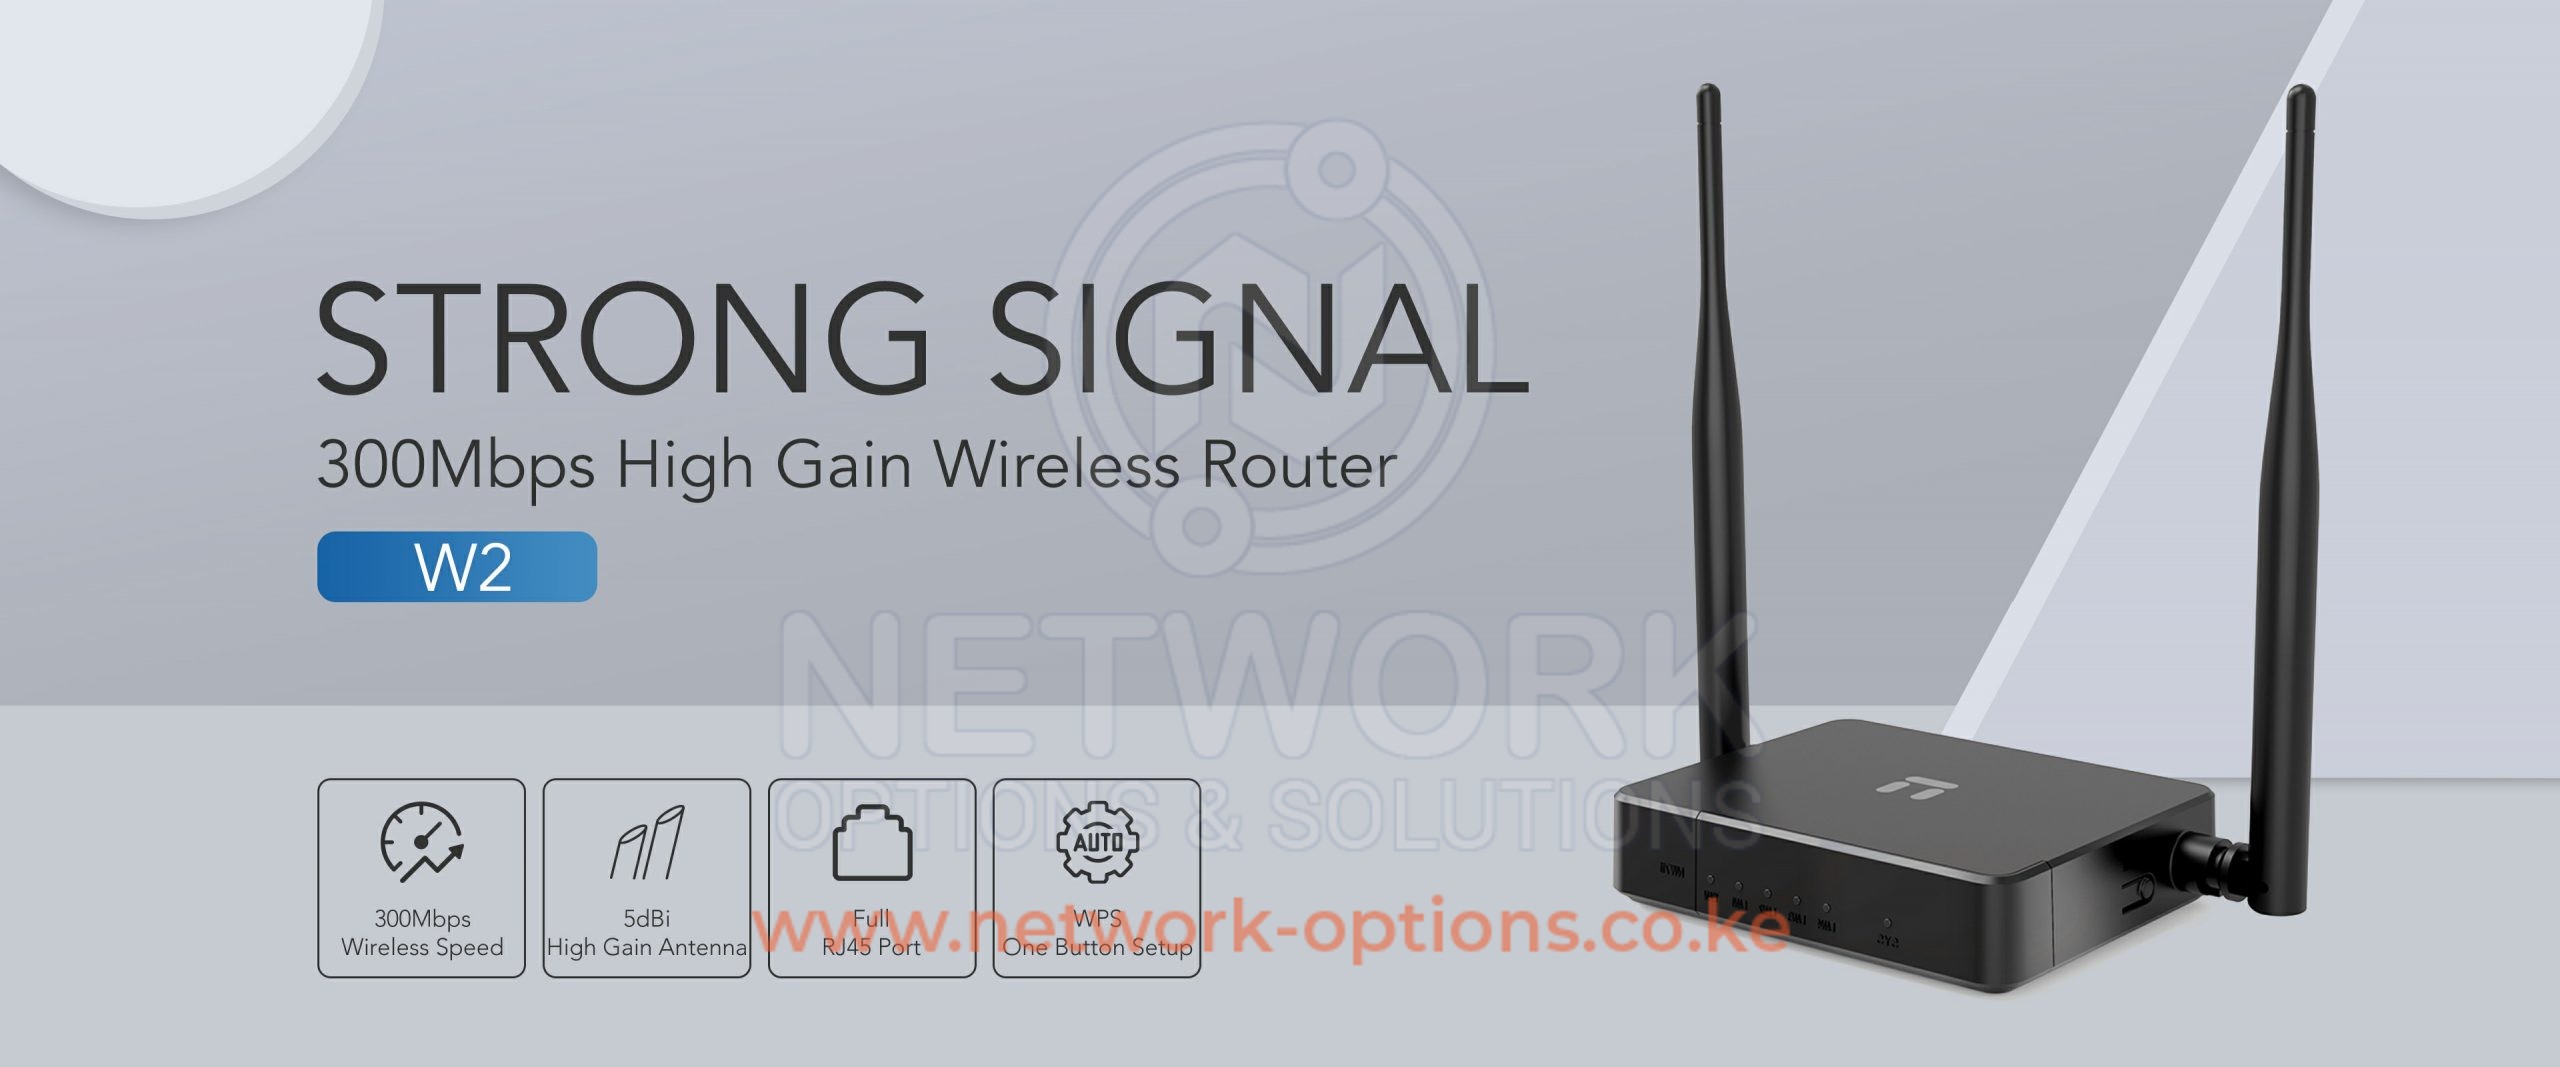 netis Wireless Router